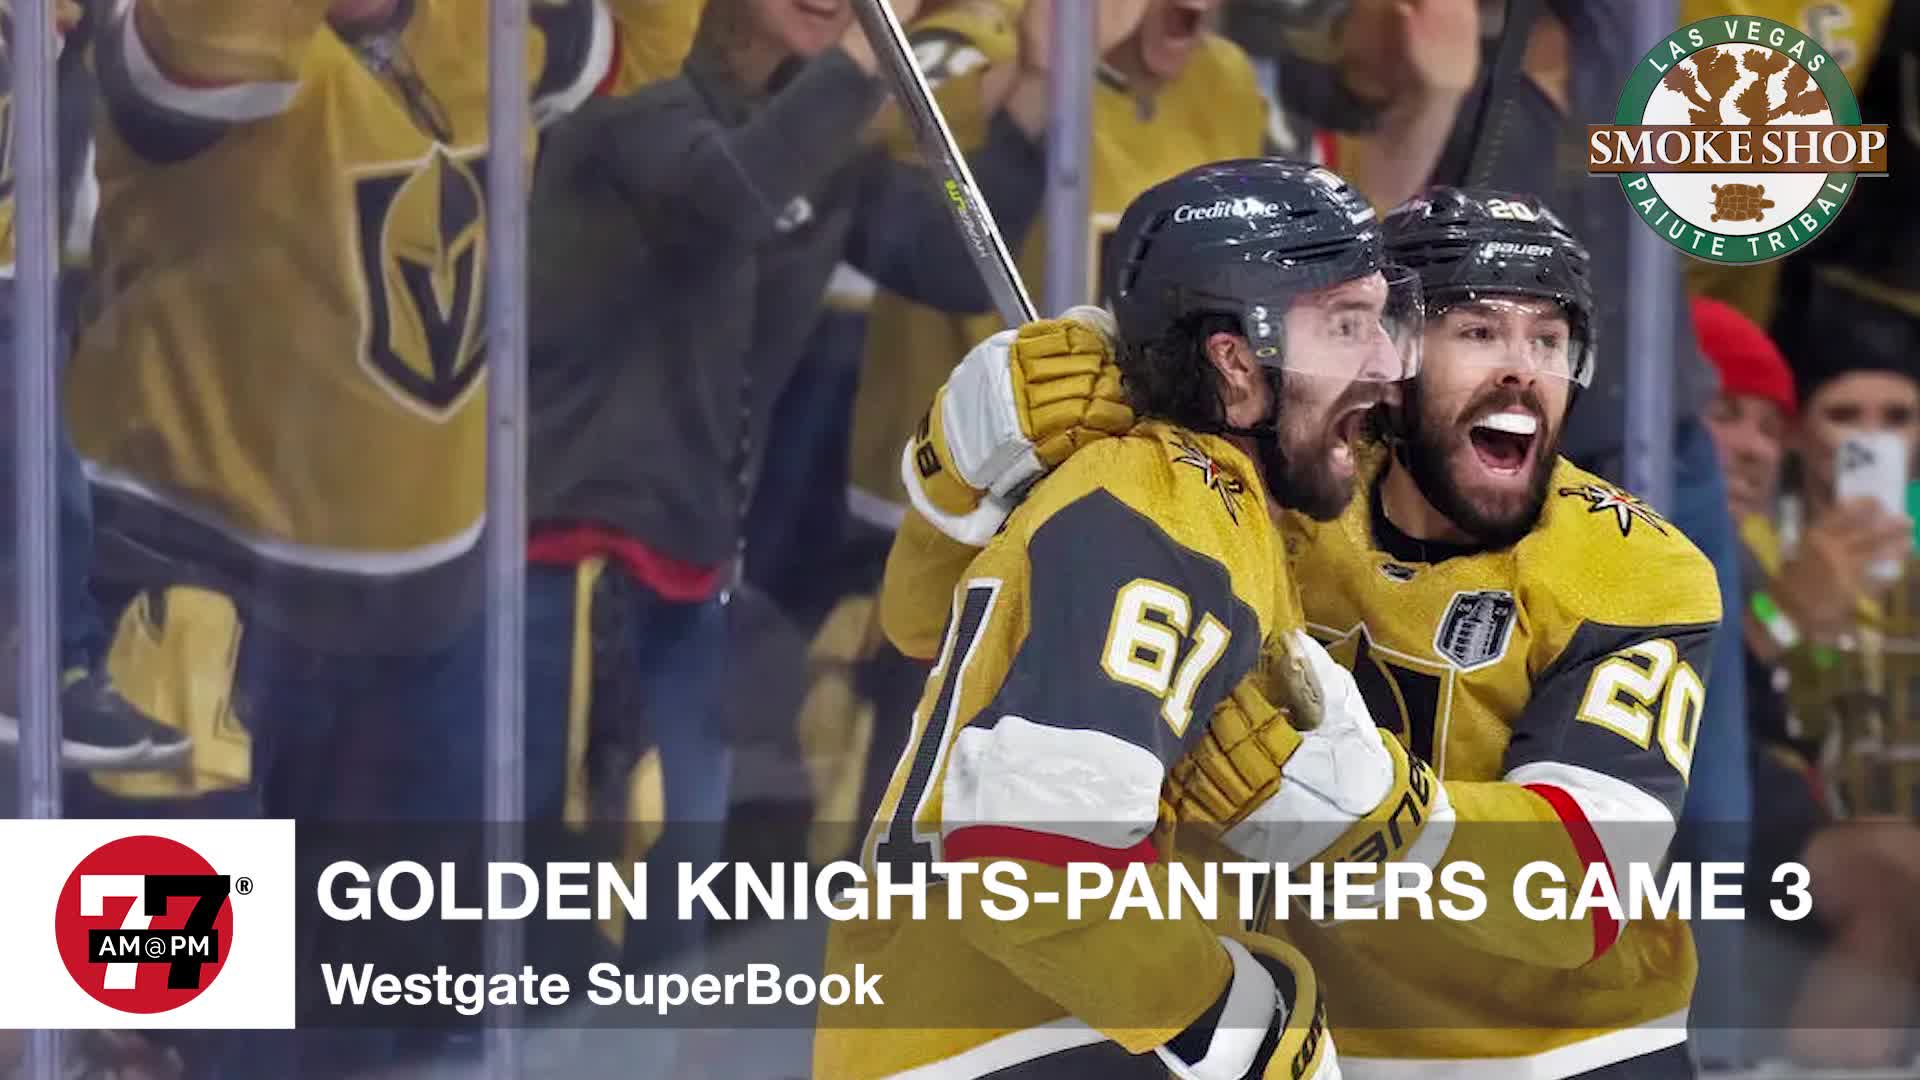 Golden Knights-Panthers Game 3